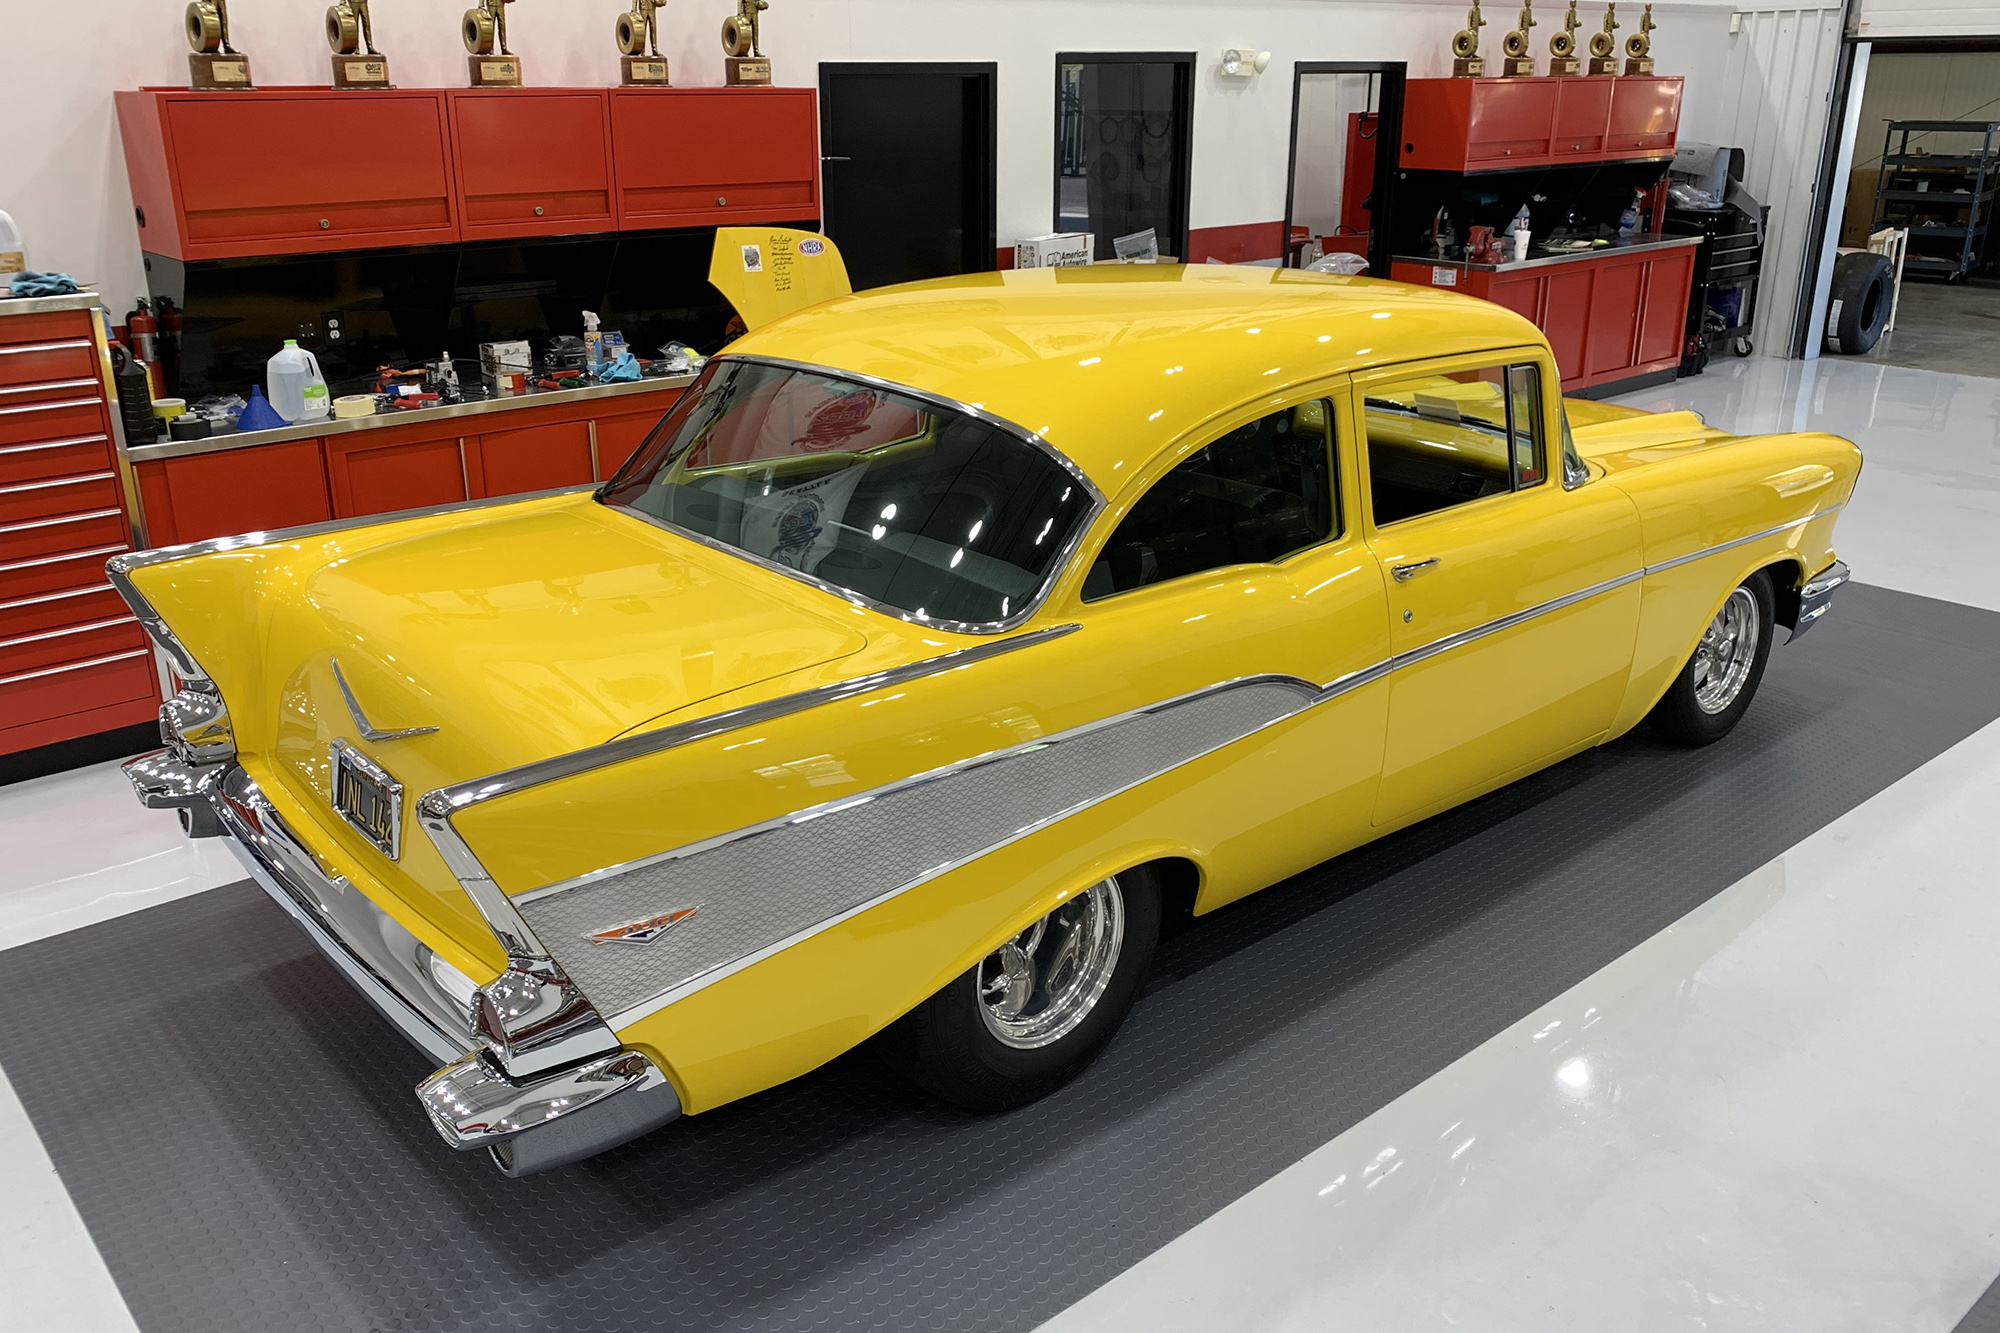 Car Restorers, Threatened with Jailtime, Get Help From SEMA and Barrett-Jackson